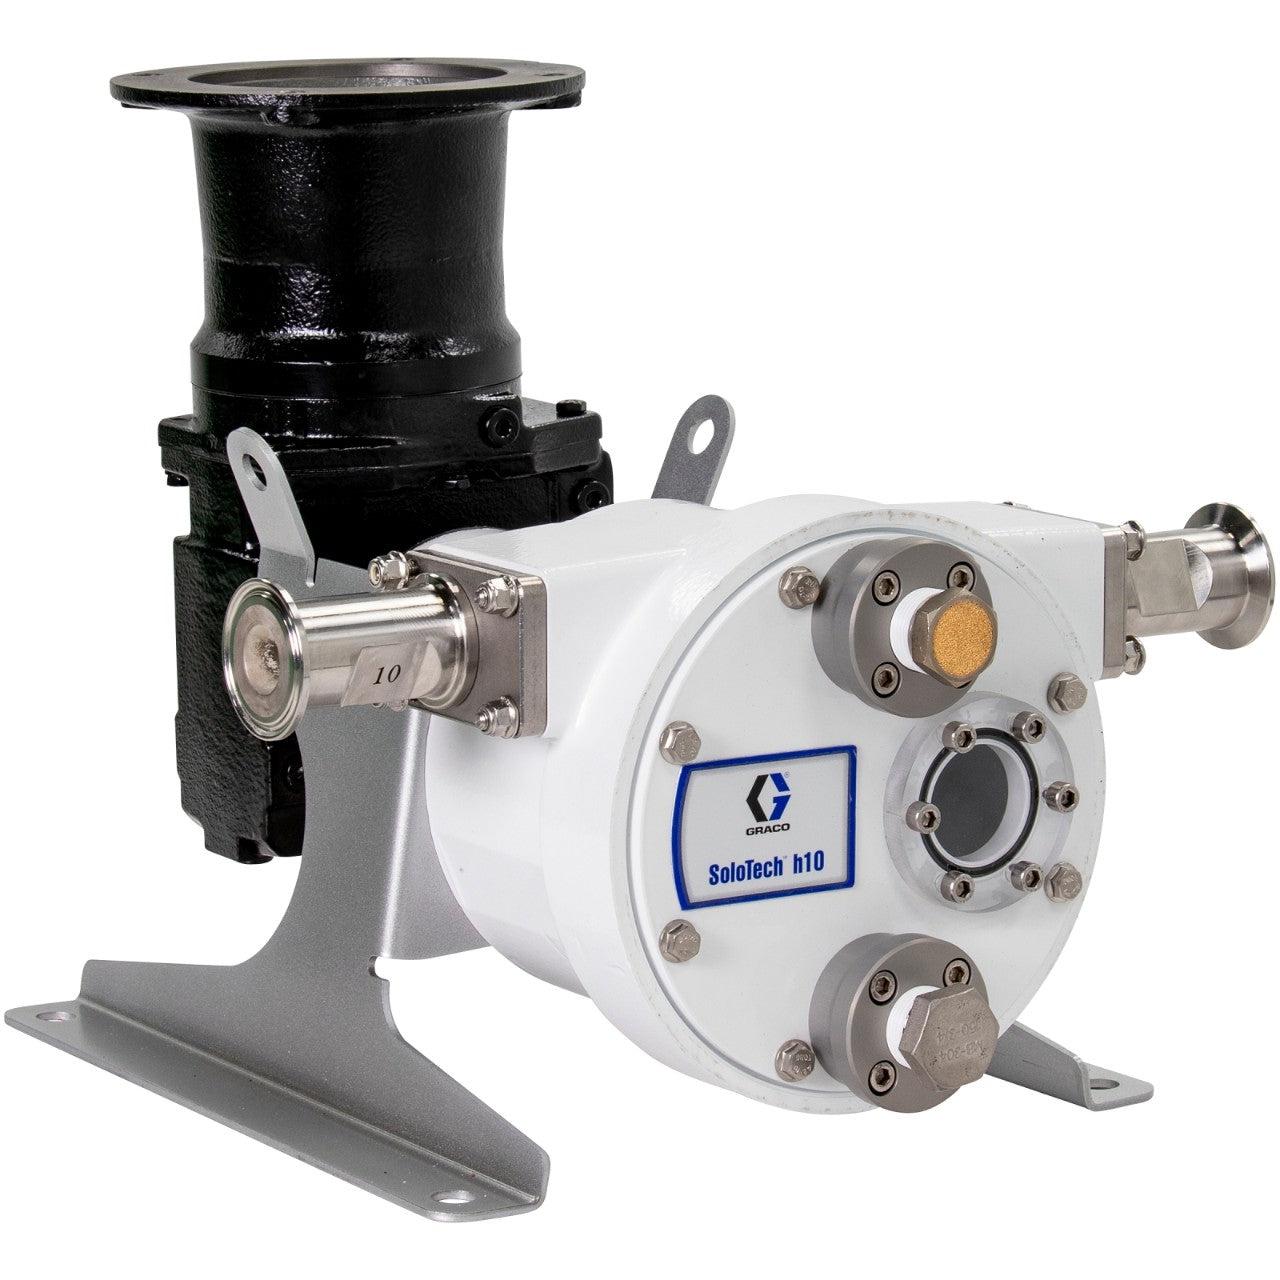 SoloTechª h16 Peristaltic Pump, Med-speed gear reducer no motor, IEC, FDA Nitrile Hose, SST Sanitary Clamp Barb